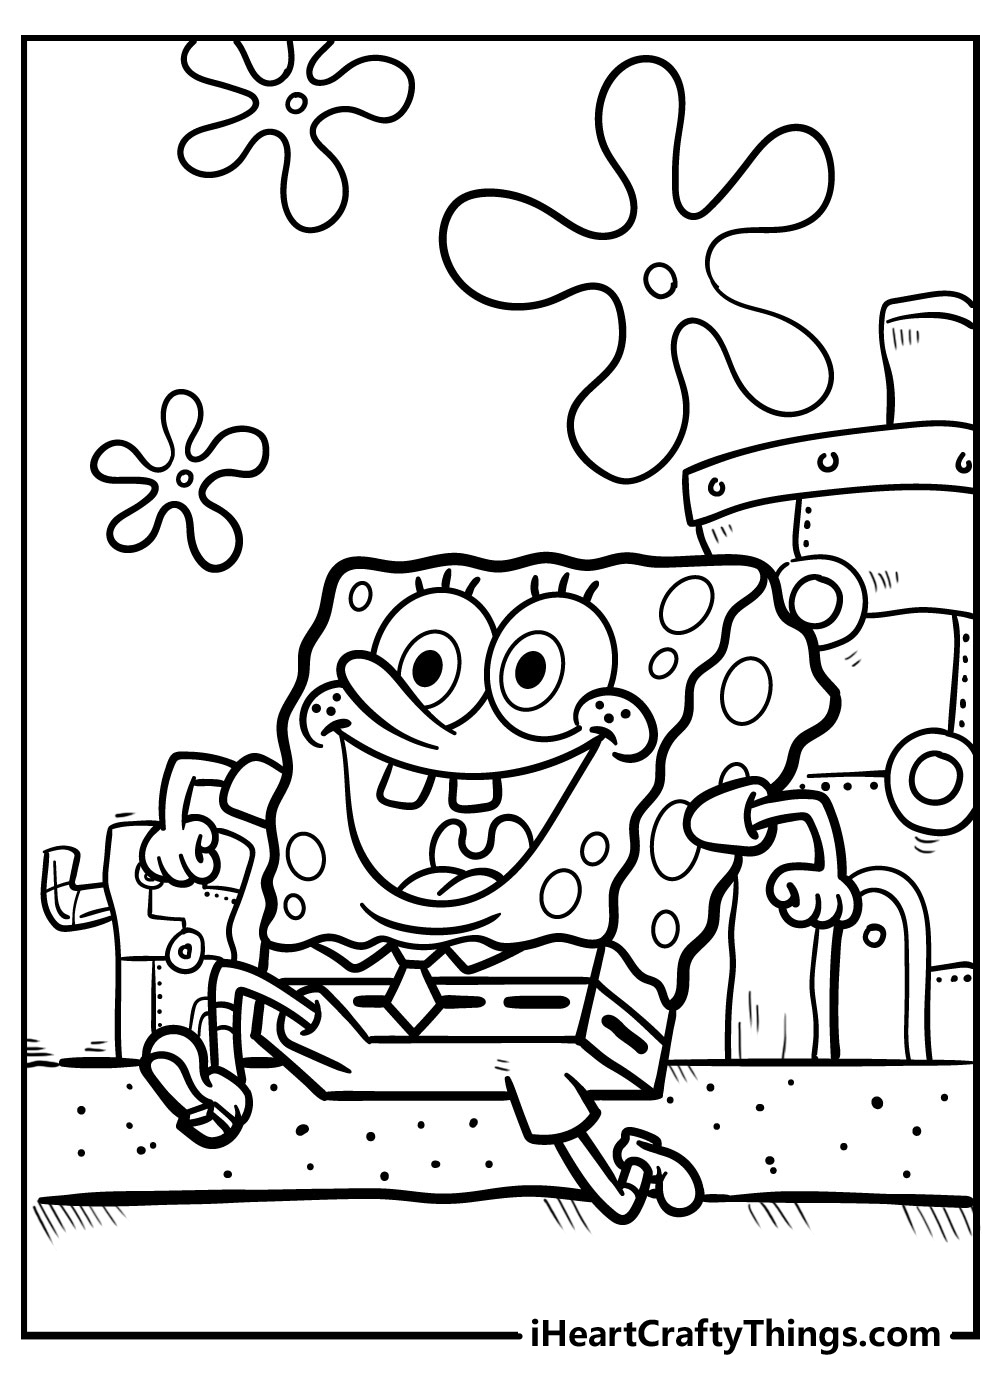 Funny Spongebob Coloring Pages Printables 49